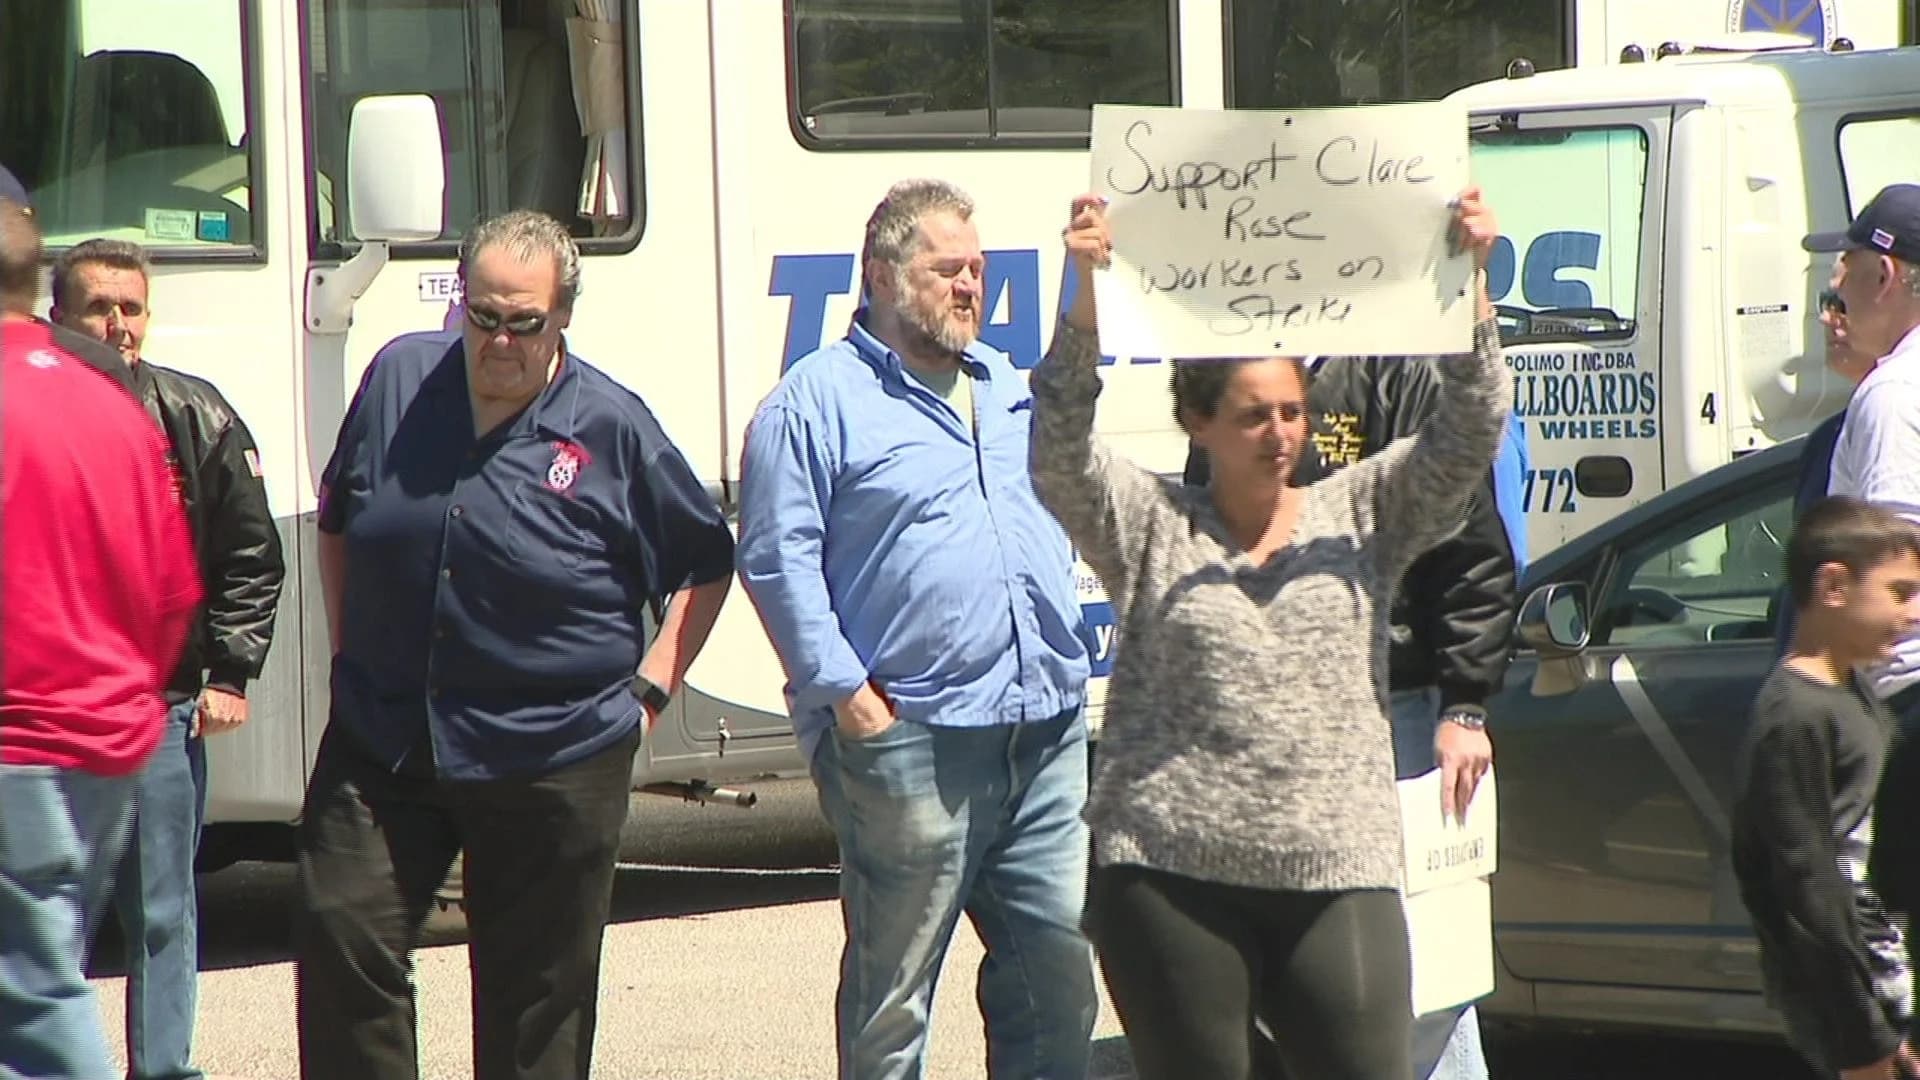 Clare Rose workers rally for support in Patchogue